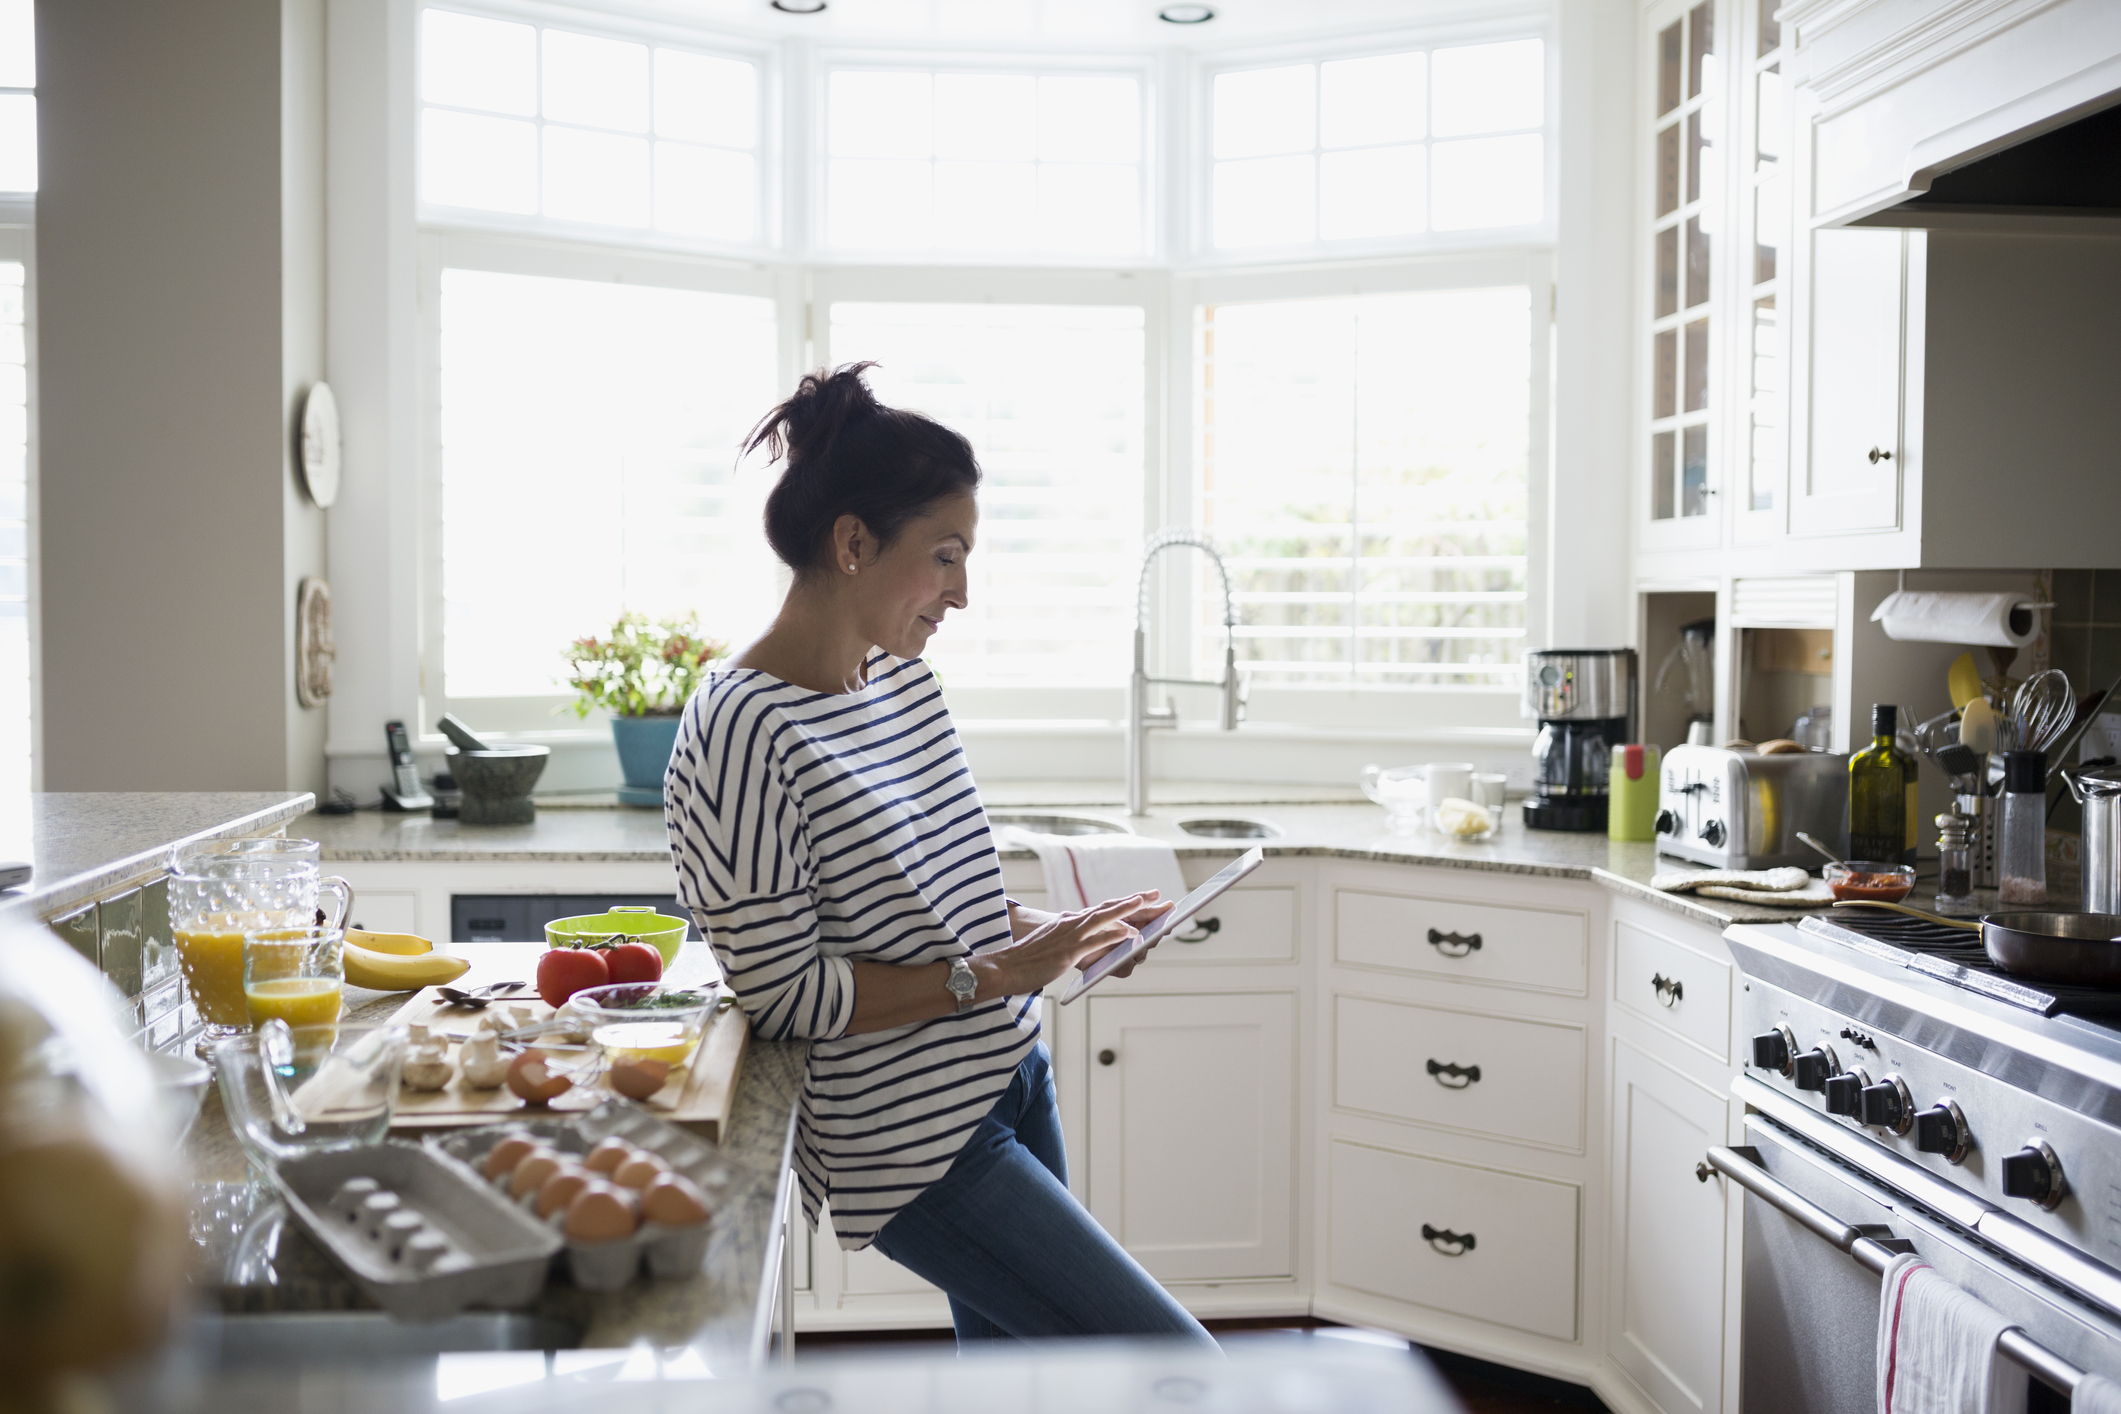 Woman cooking in kitchen looking up recipe on tablet